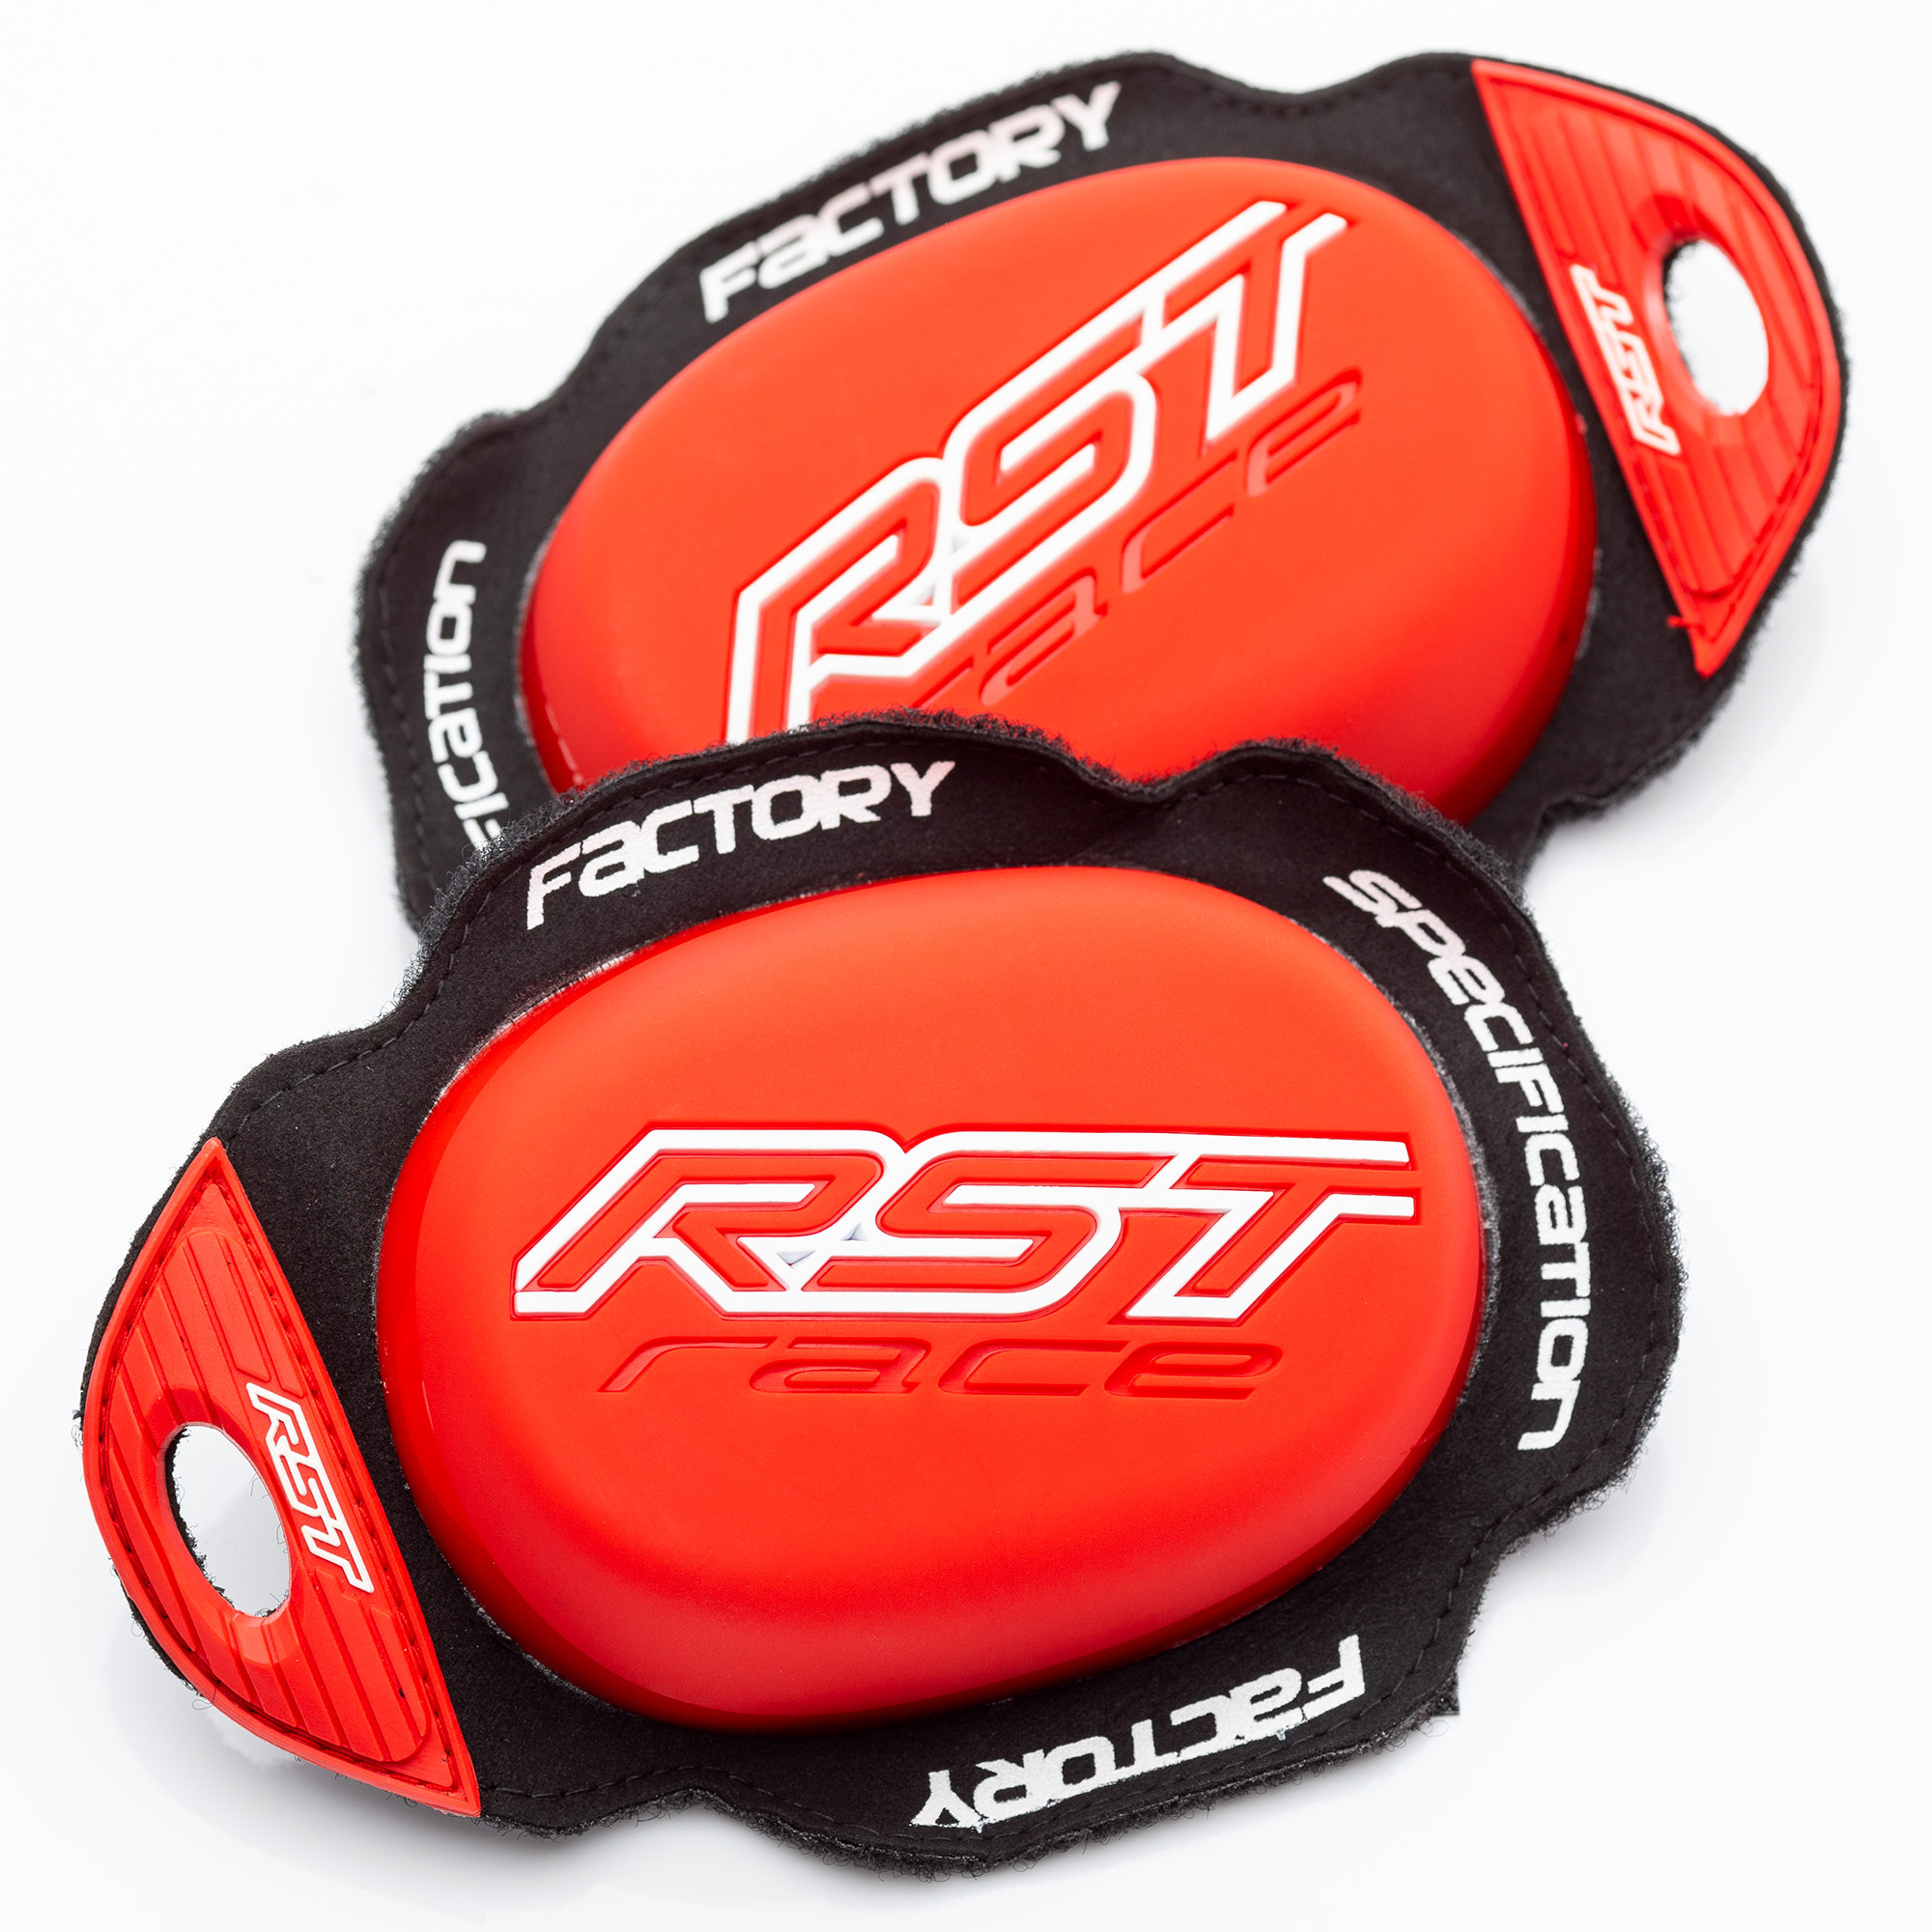 RST Factory Reverse Fit Motorcycle Knee Sliders V4 Suits Also fit Spyke Reverse